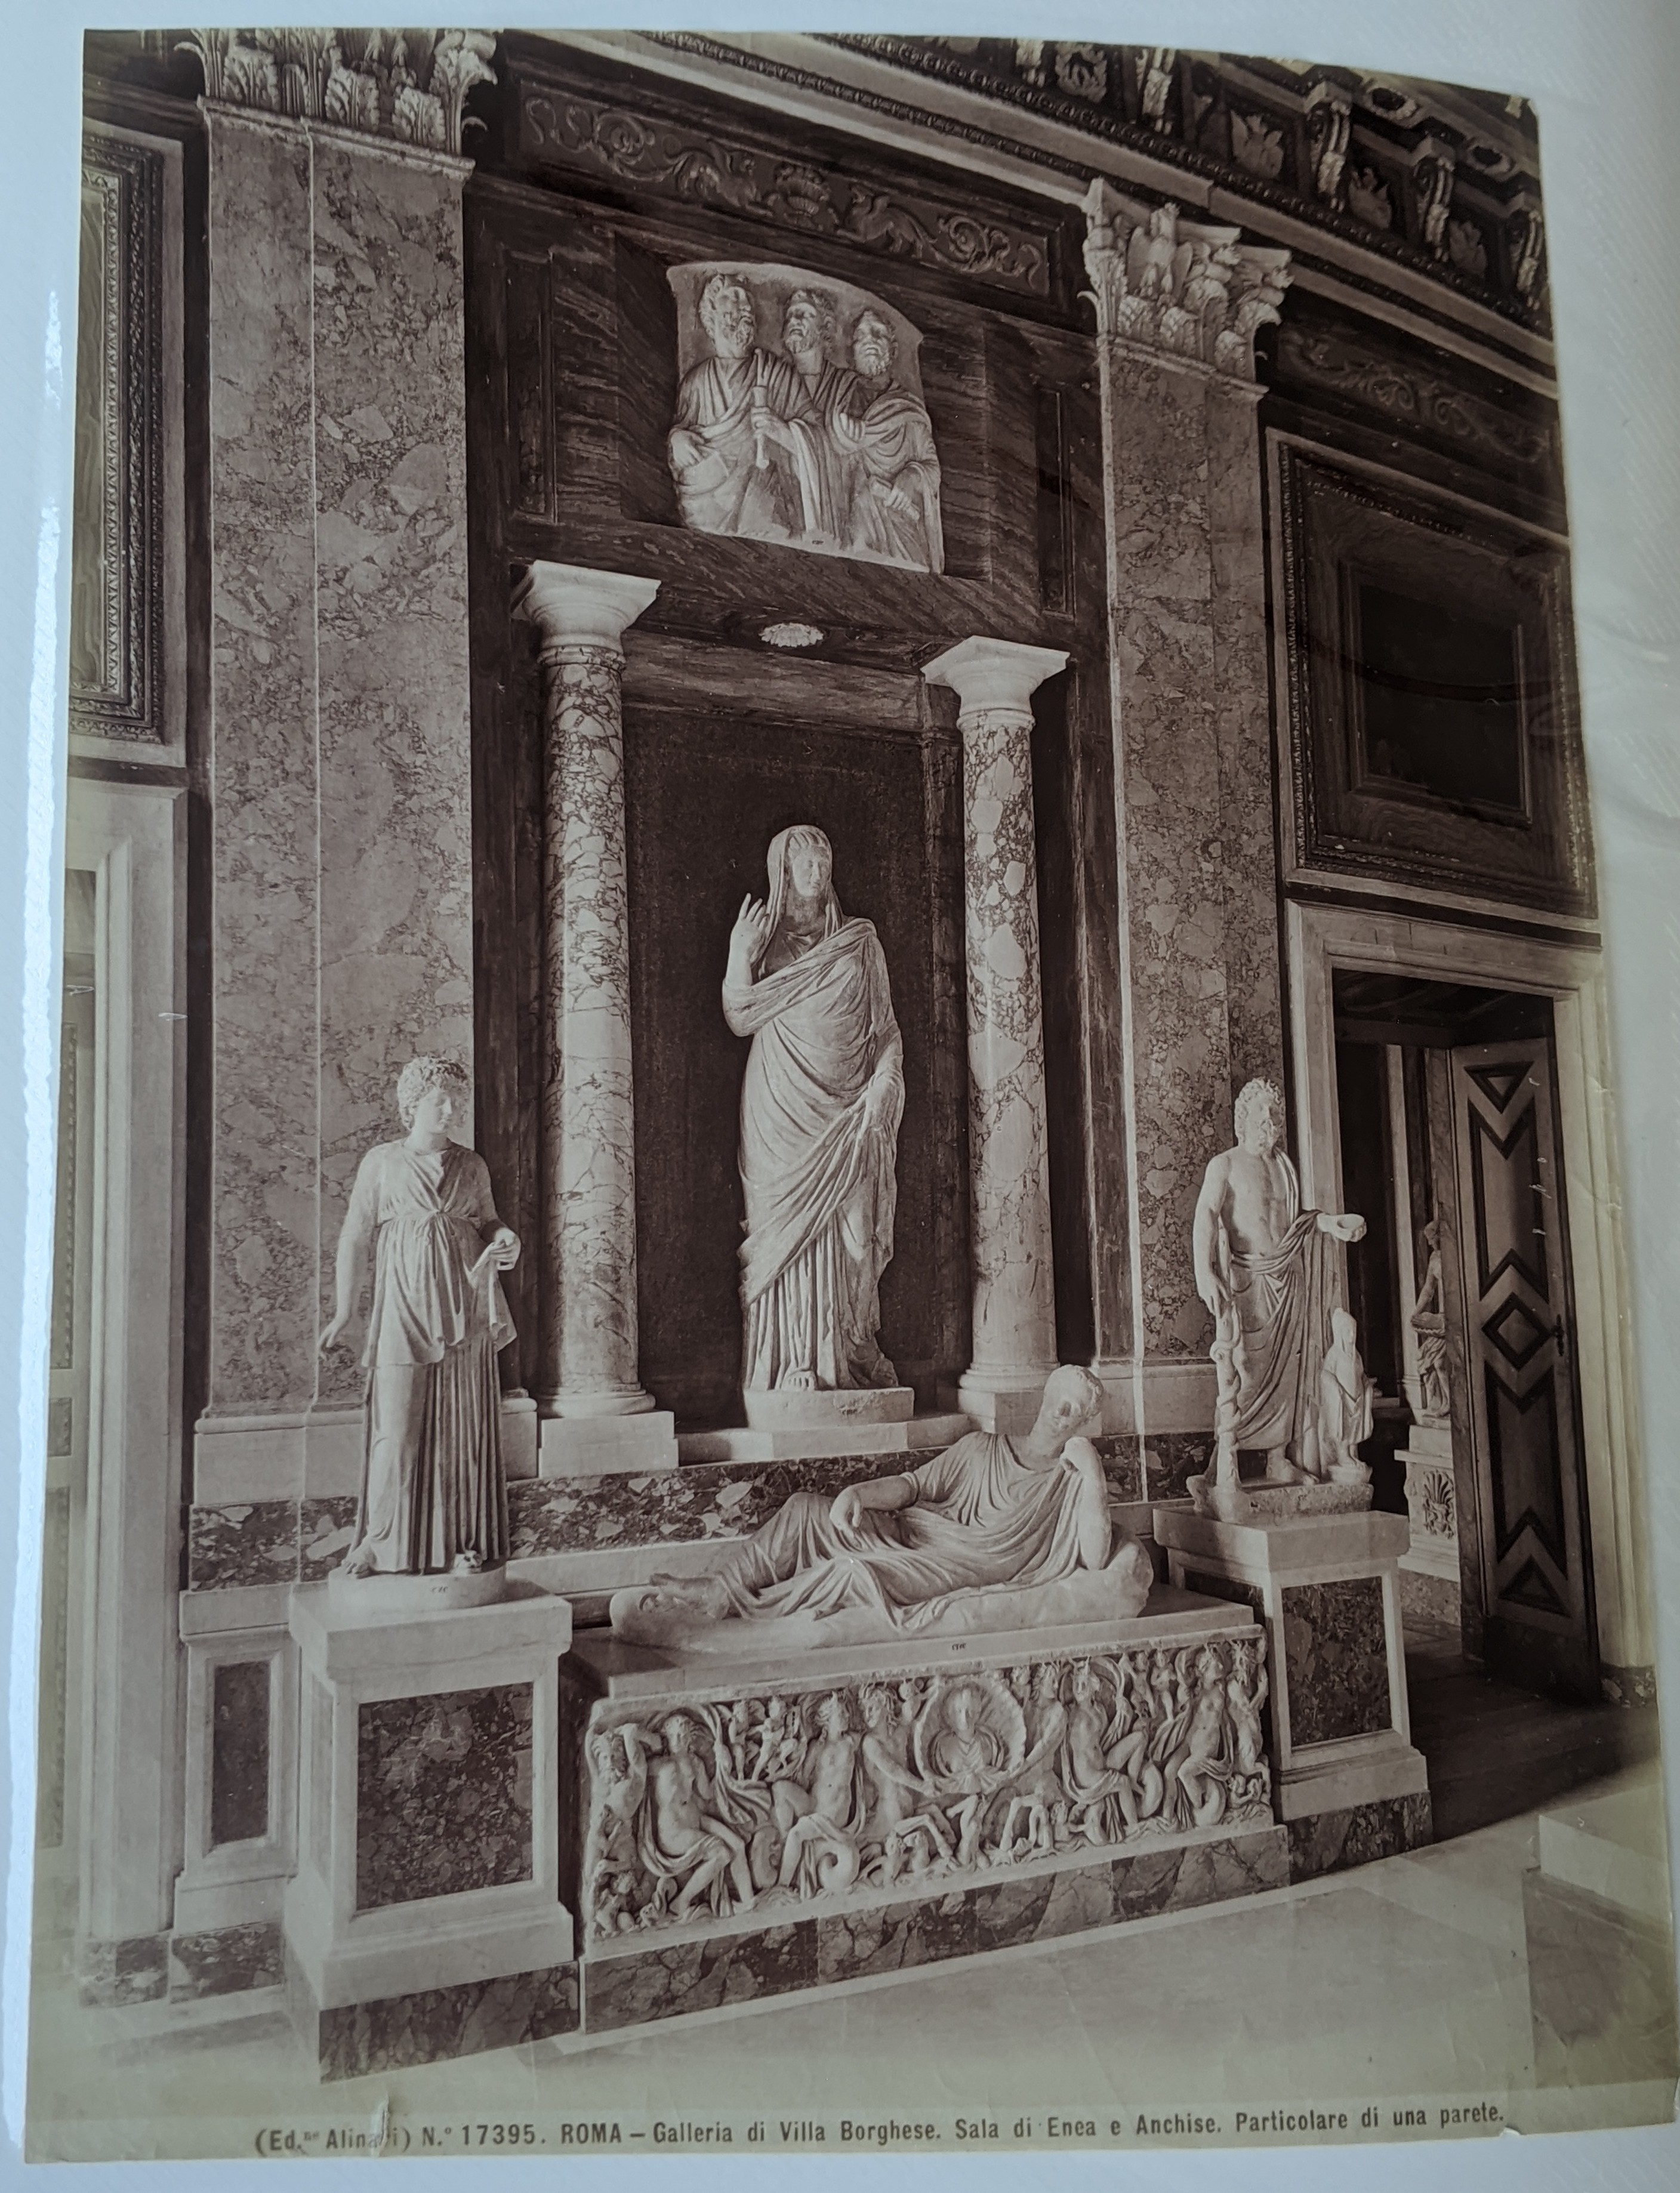 Fratelli Alinari (19th century Italian), a collection of 26 architectural photographs of Italy to - Image 19 of 21